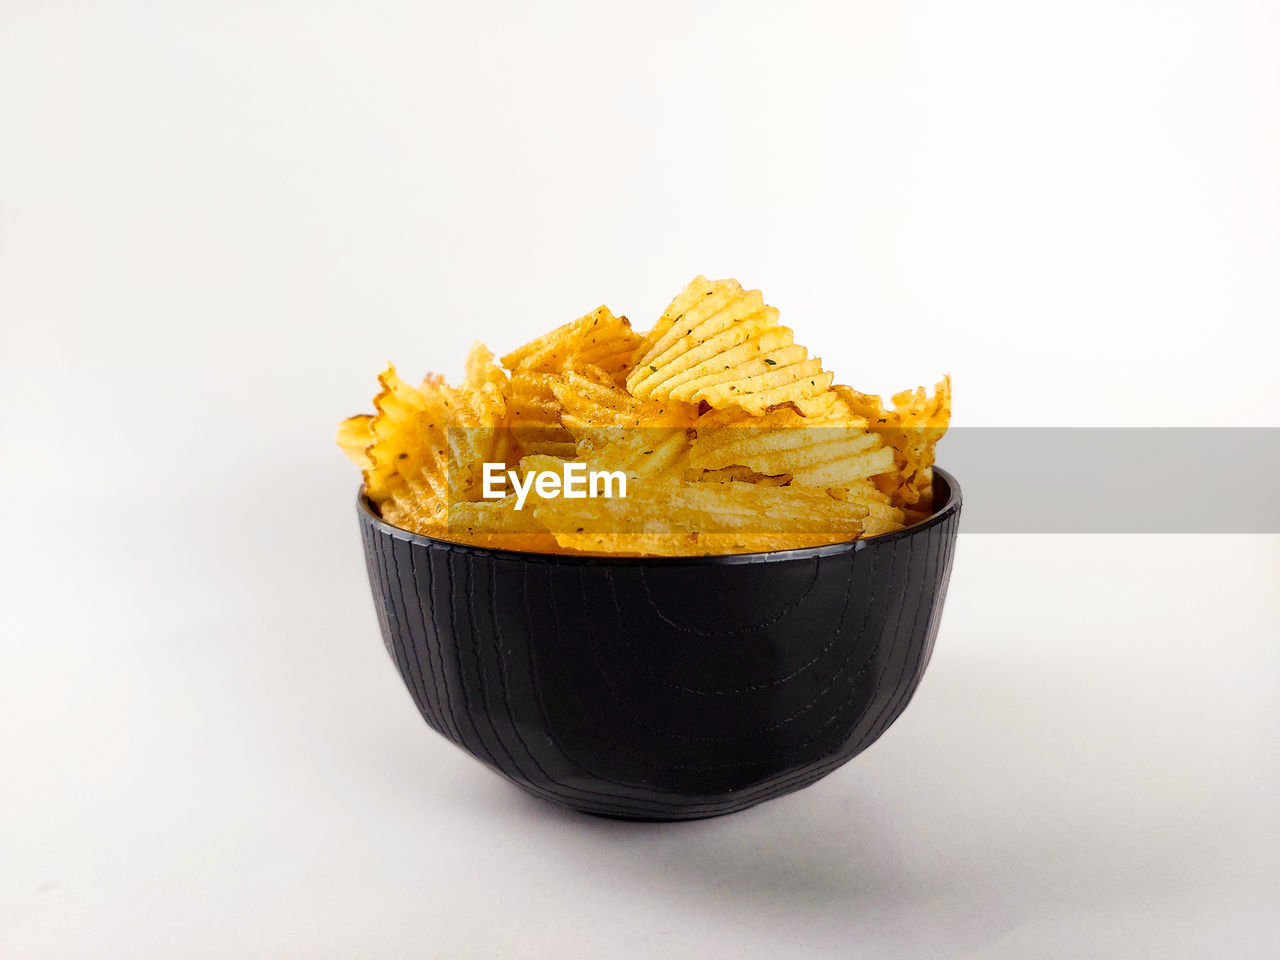 food and drink, food, fast food, dish, studio shot, white background, junk food, snack, potato chip, cuisine, bowl, produce, unhealthy eating, indoors, no people, cut out, tortilla chip, freshness, yellow, raw potato, breakfast